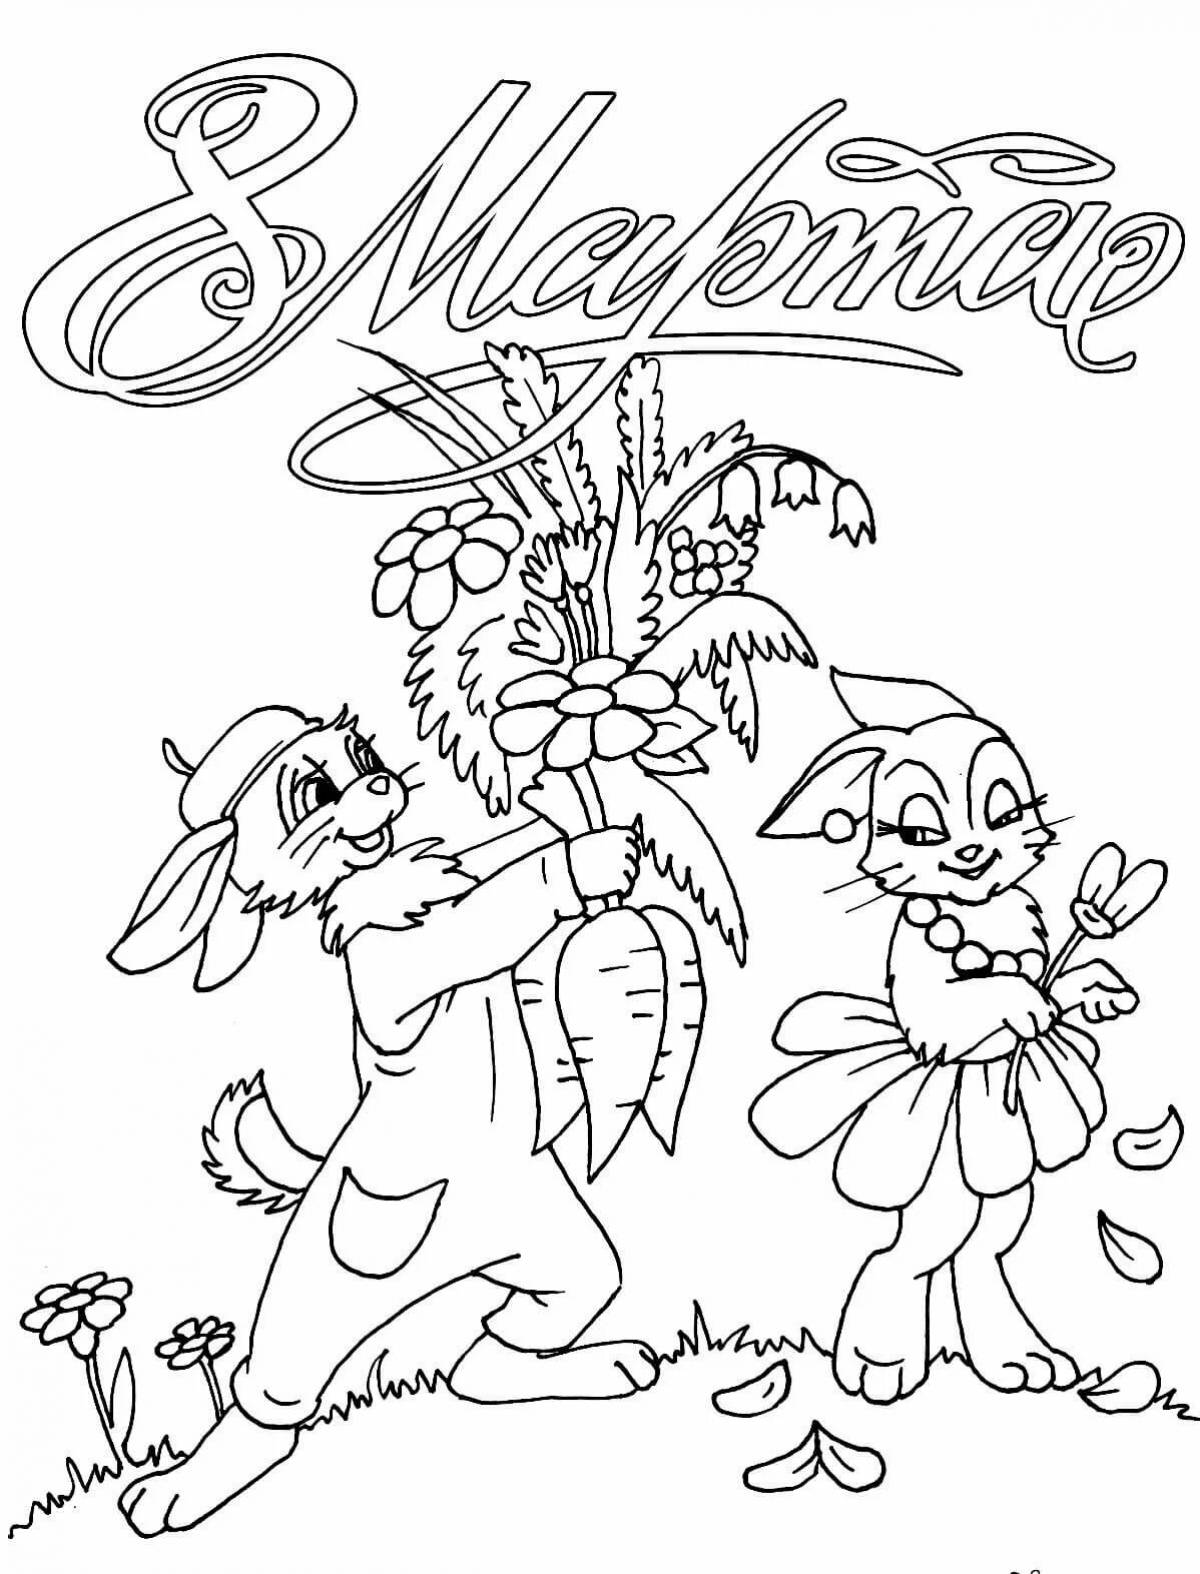 Cute wall paper March 8 coloring book